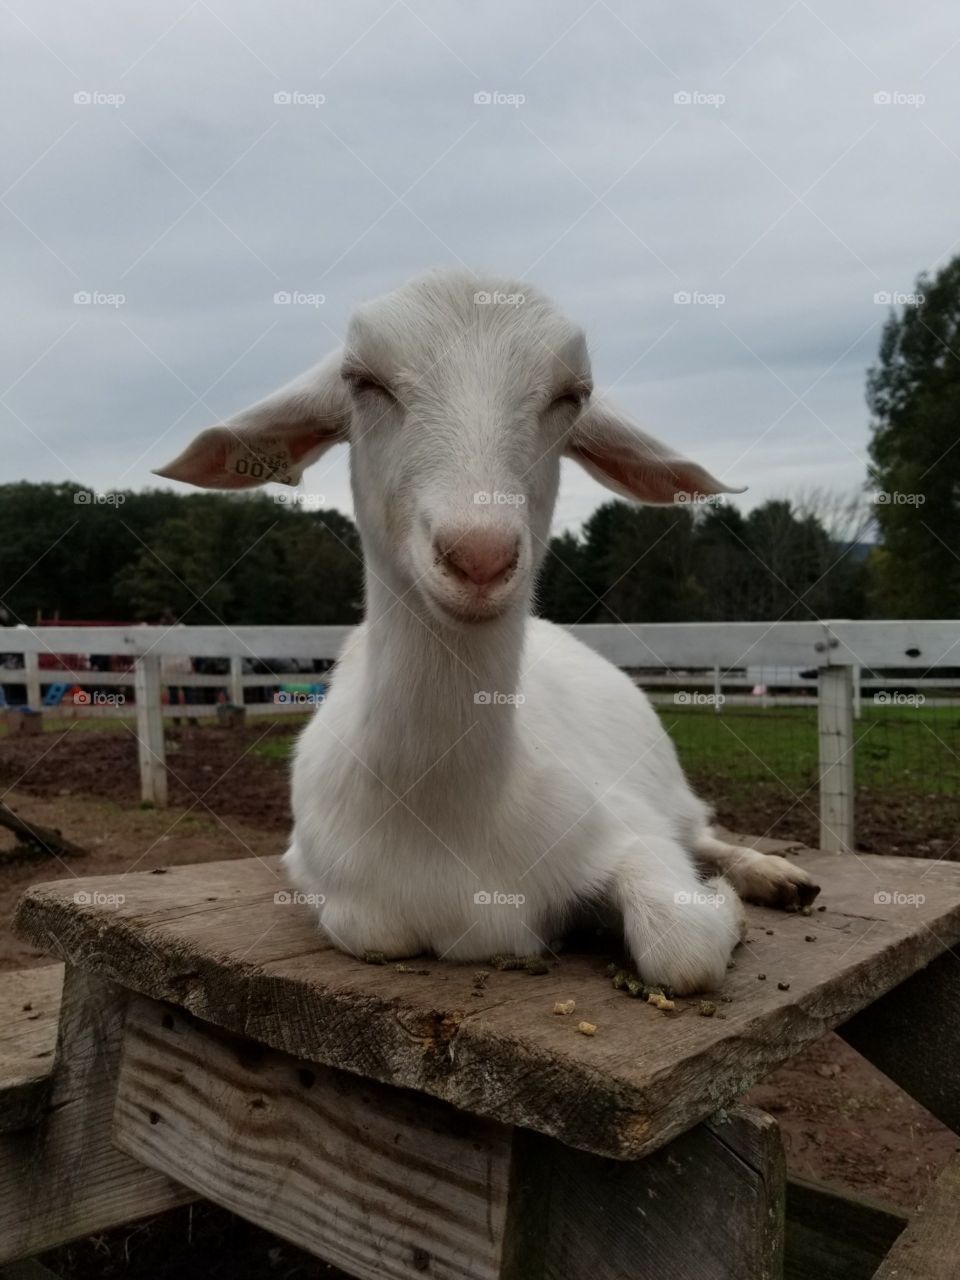 just a goat on a picnic table